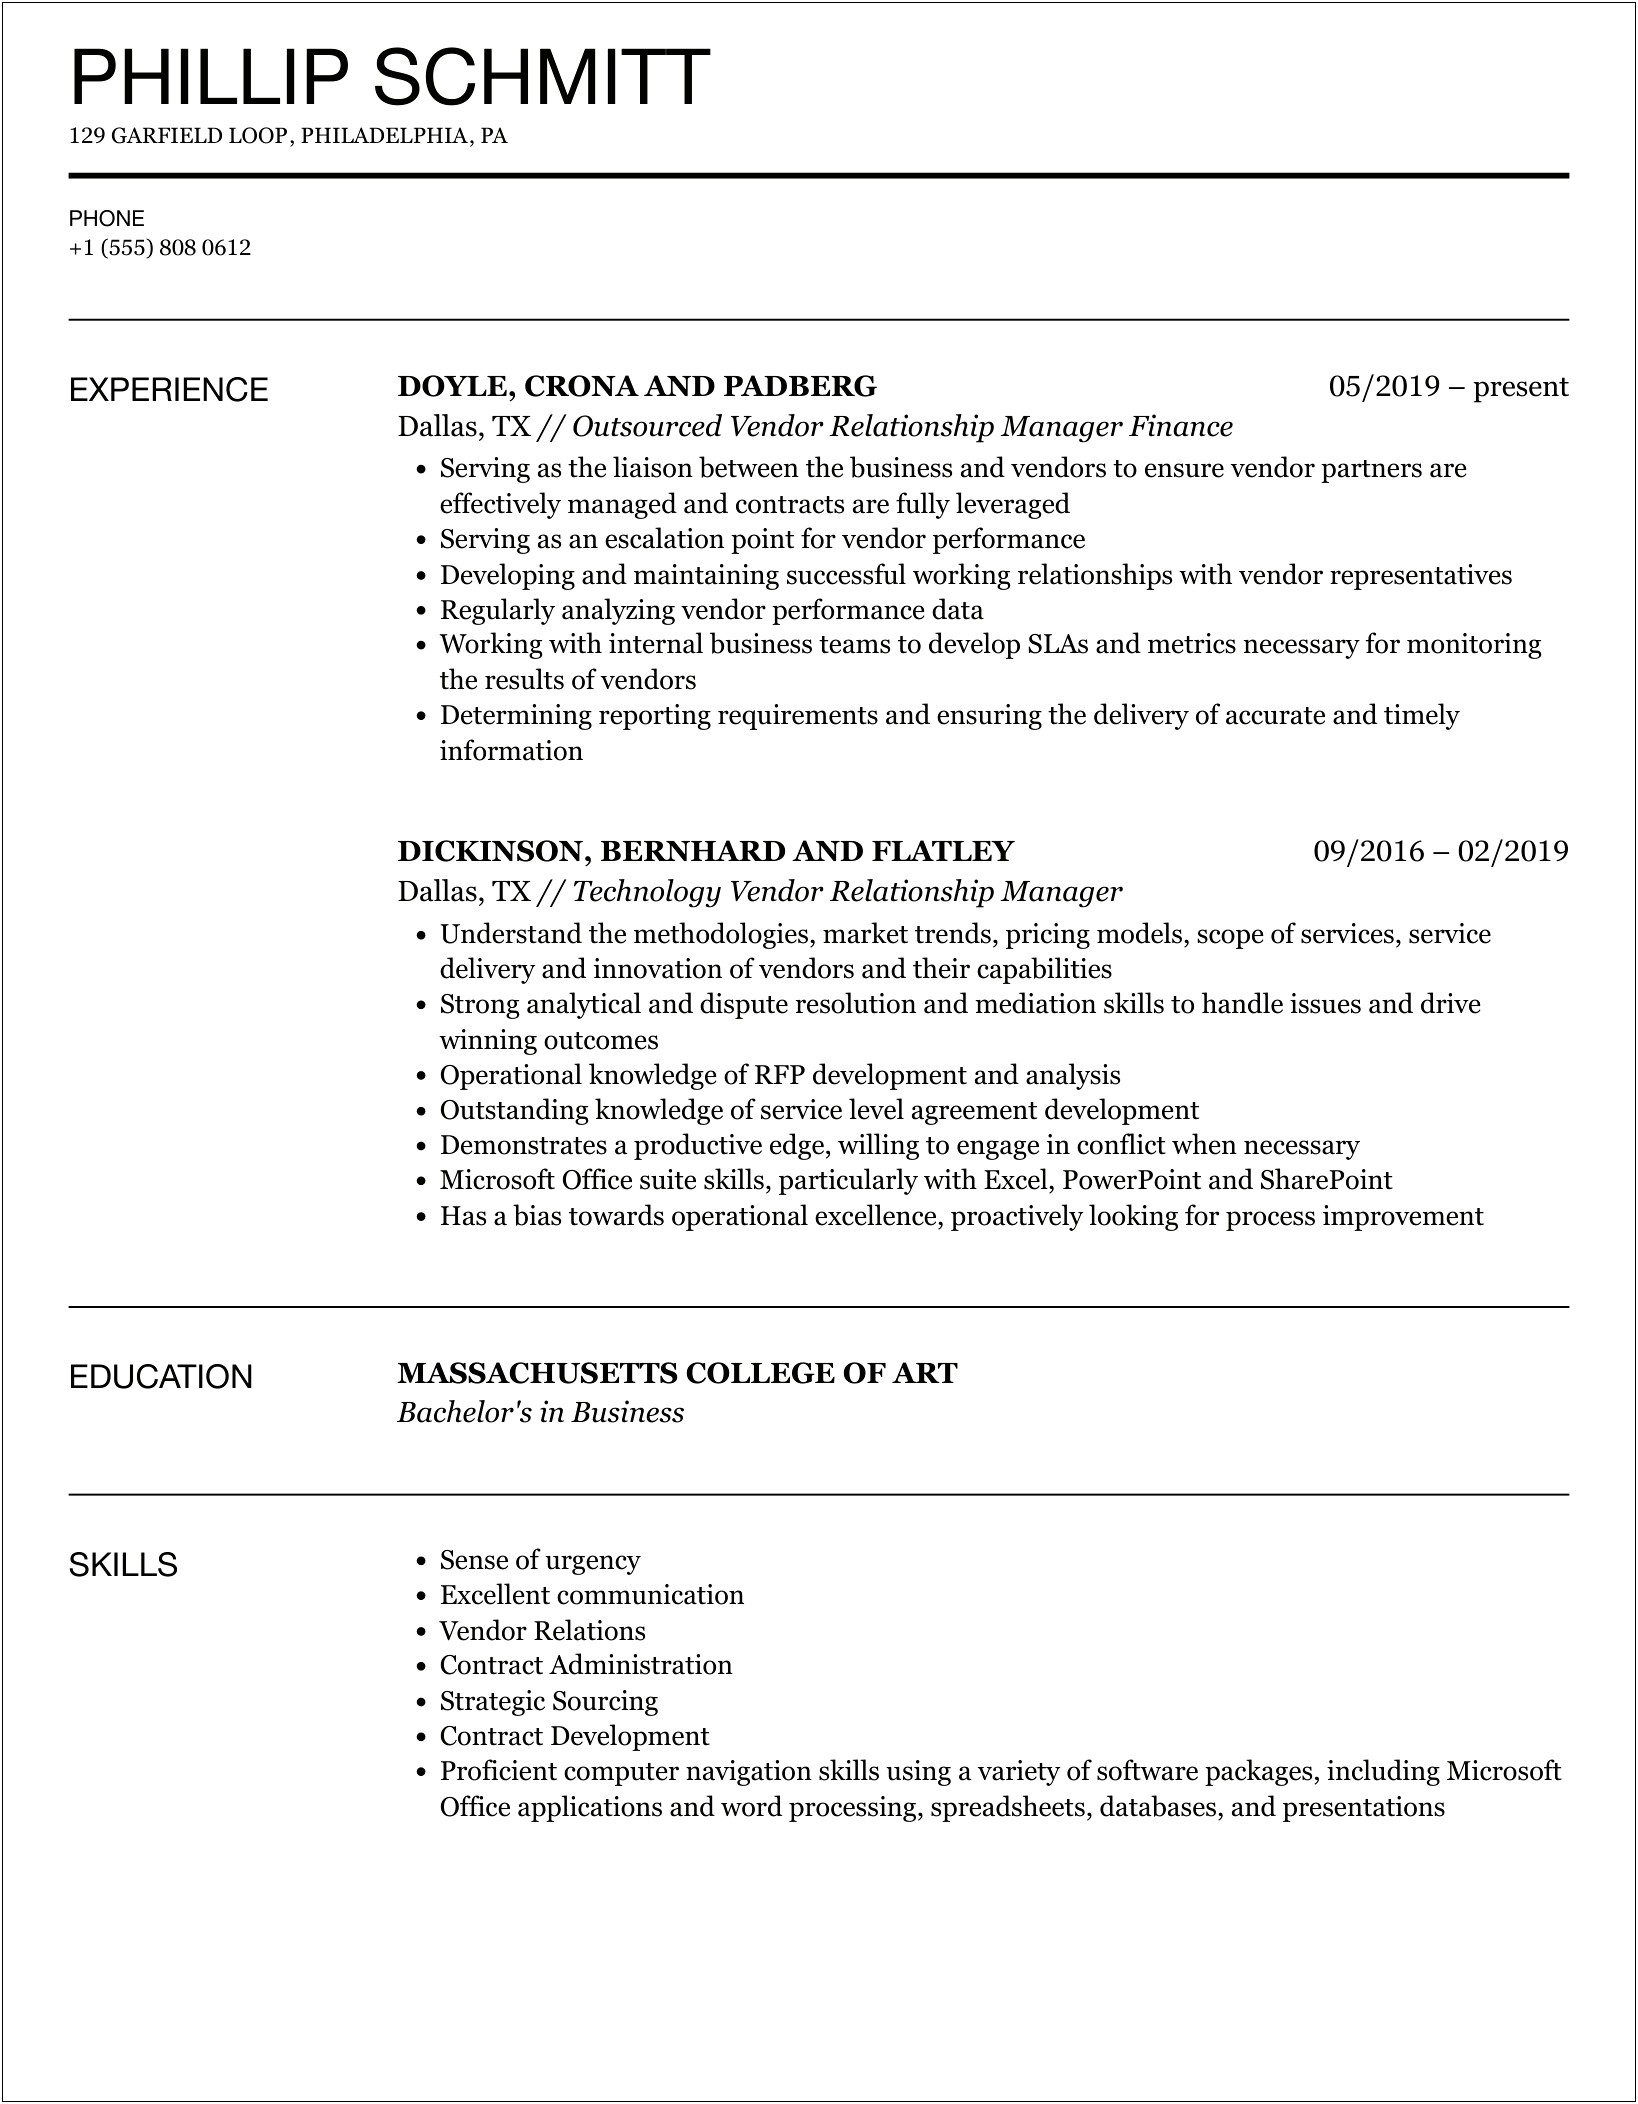 Resume Recommendations Letter From Vendor Relationship